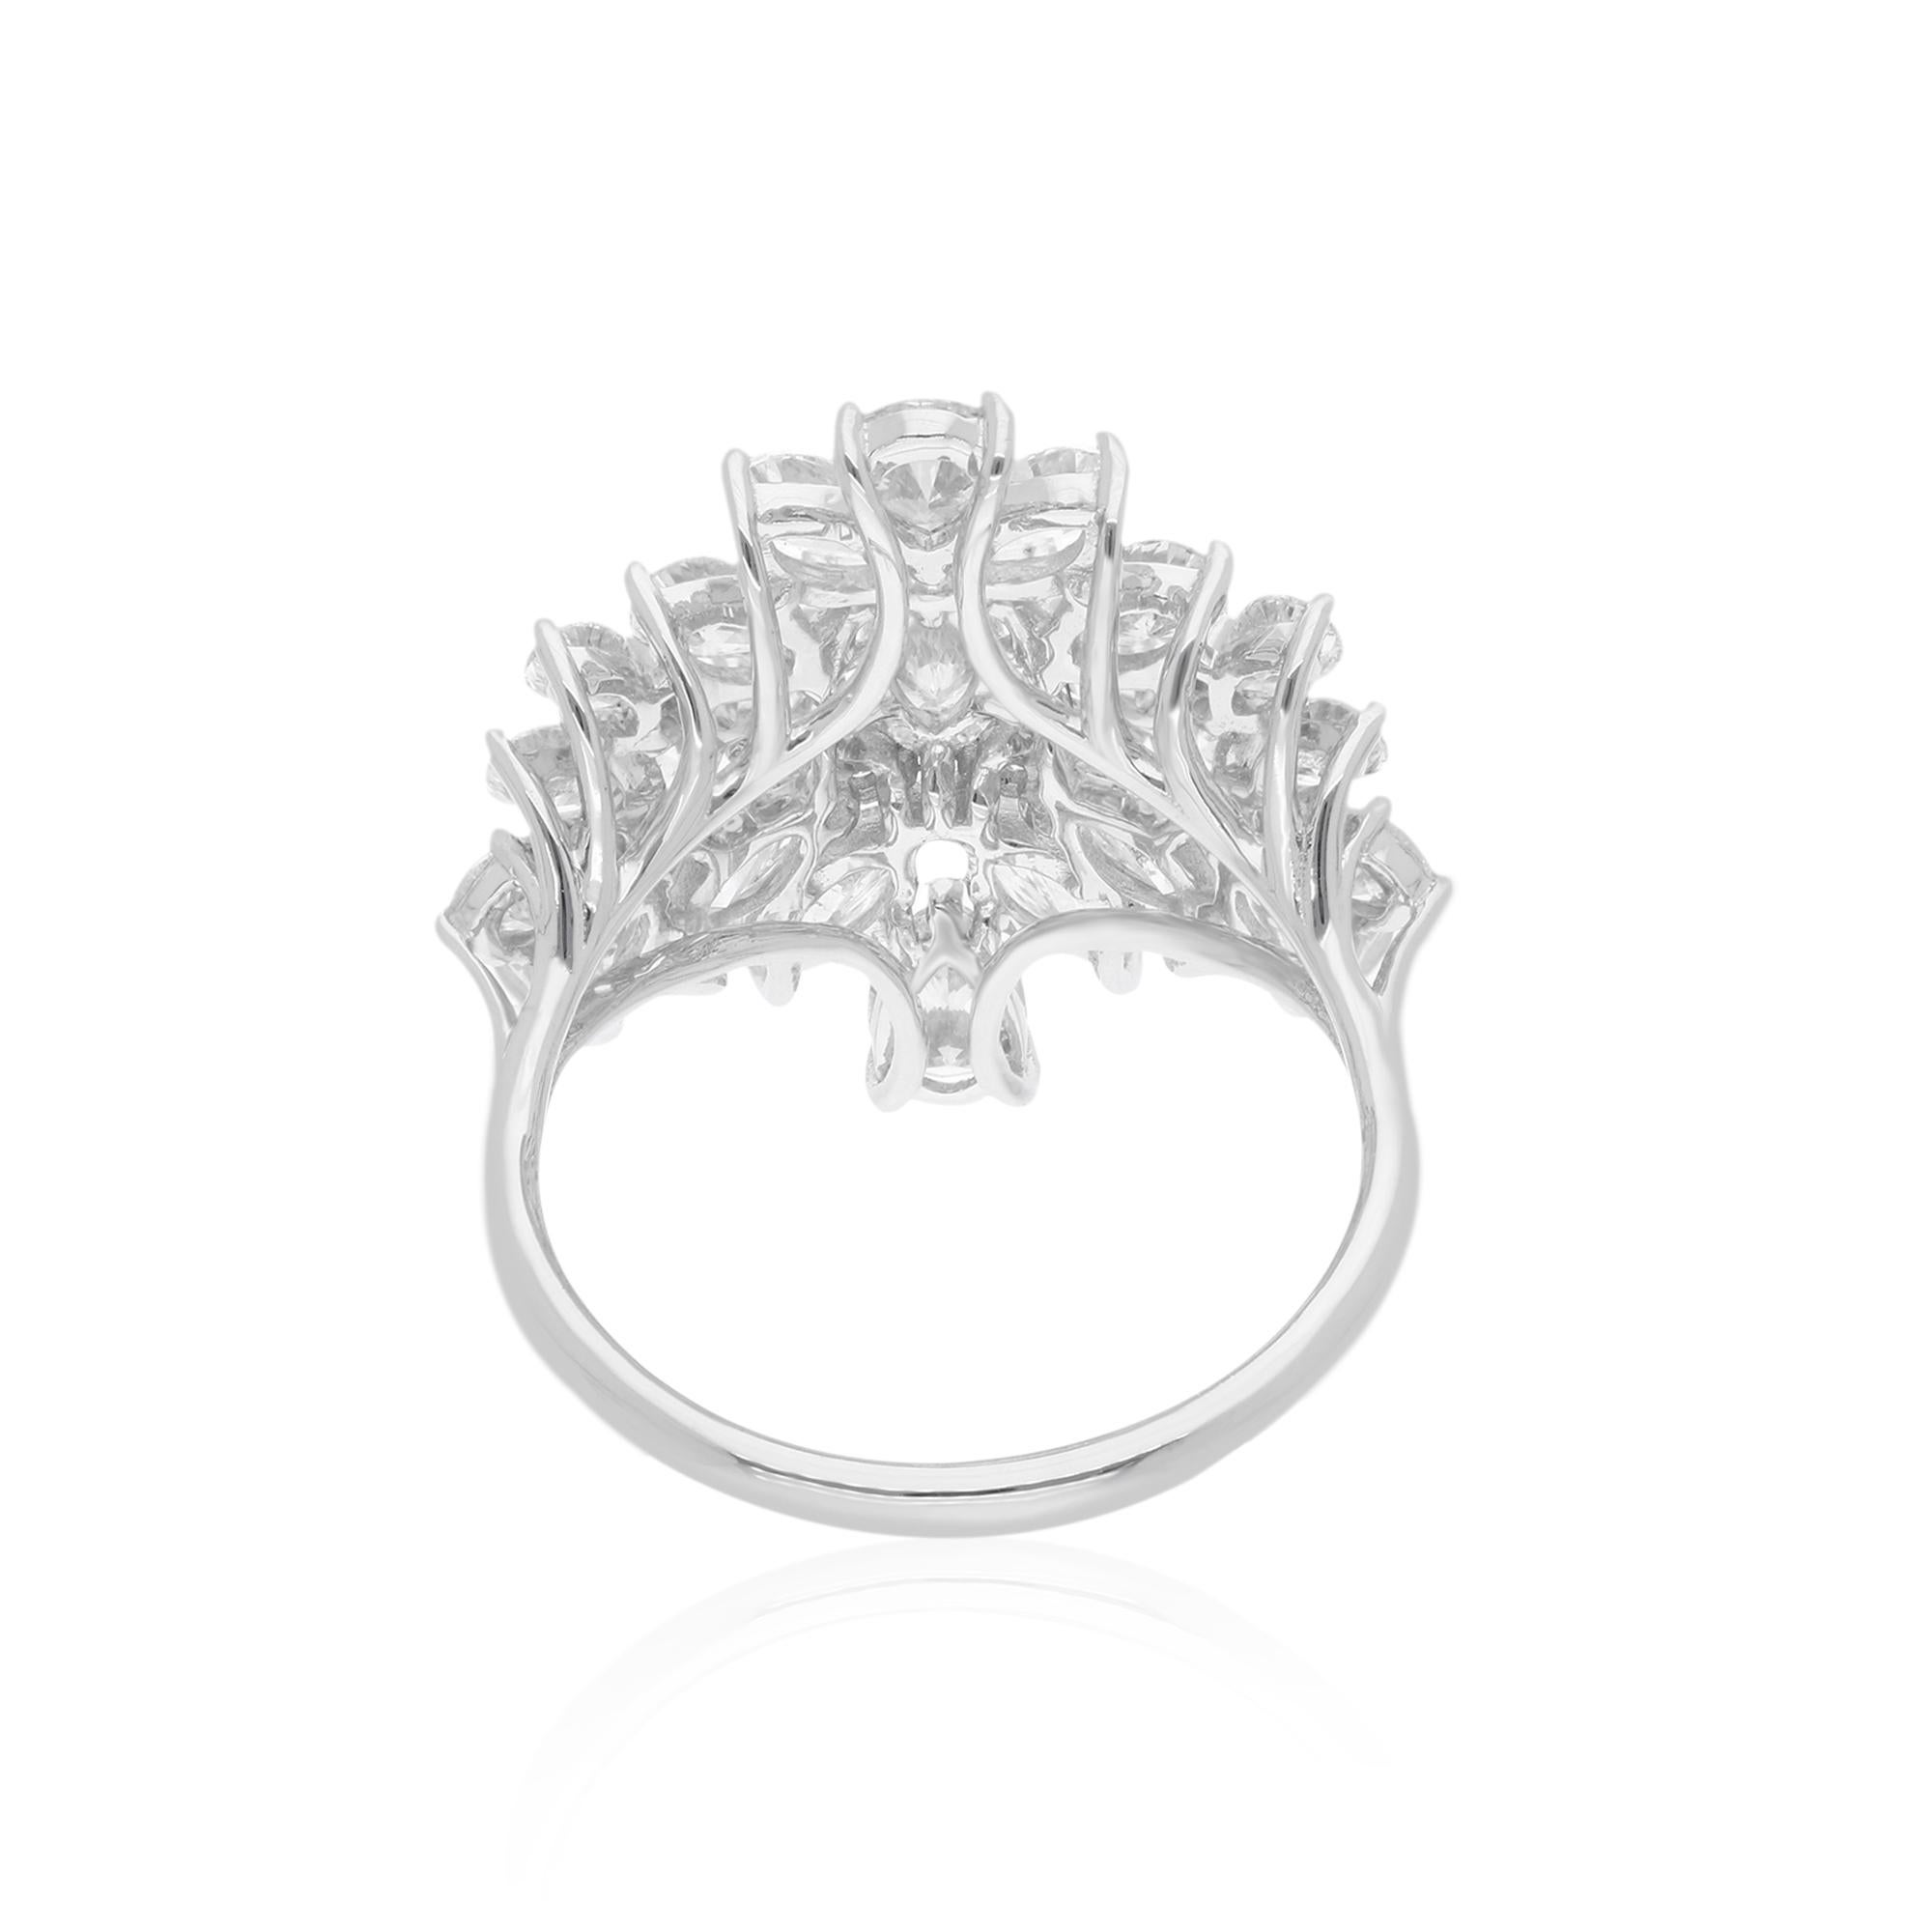 Modern 3.32 Carat Marquise & Pear Diamond Cocktail Ring 18 Karat White Gold Jewelry For Sale